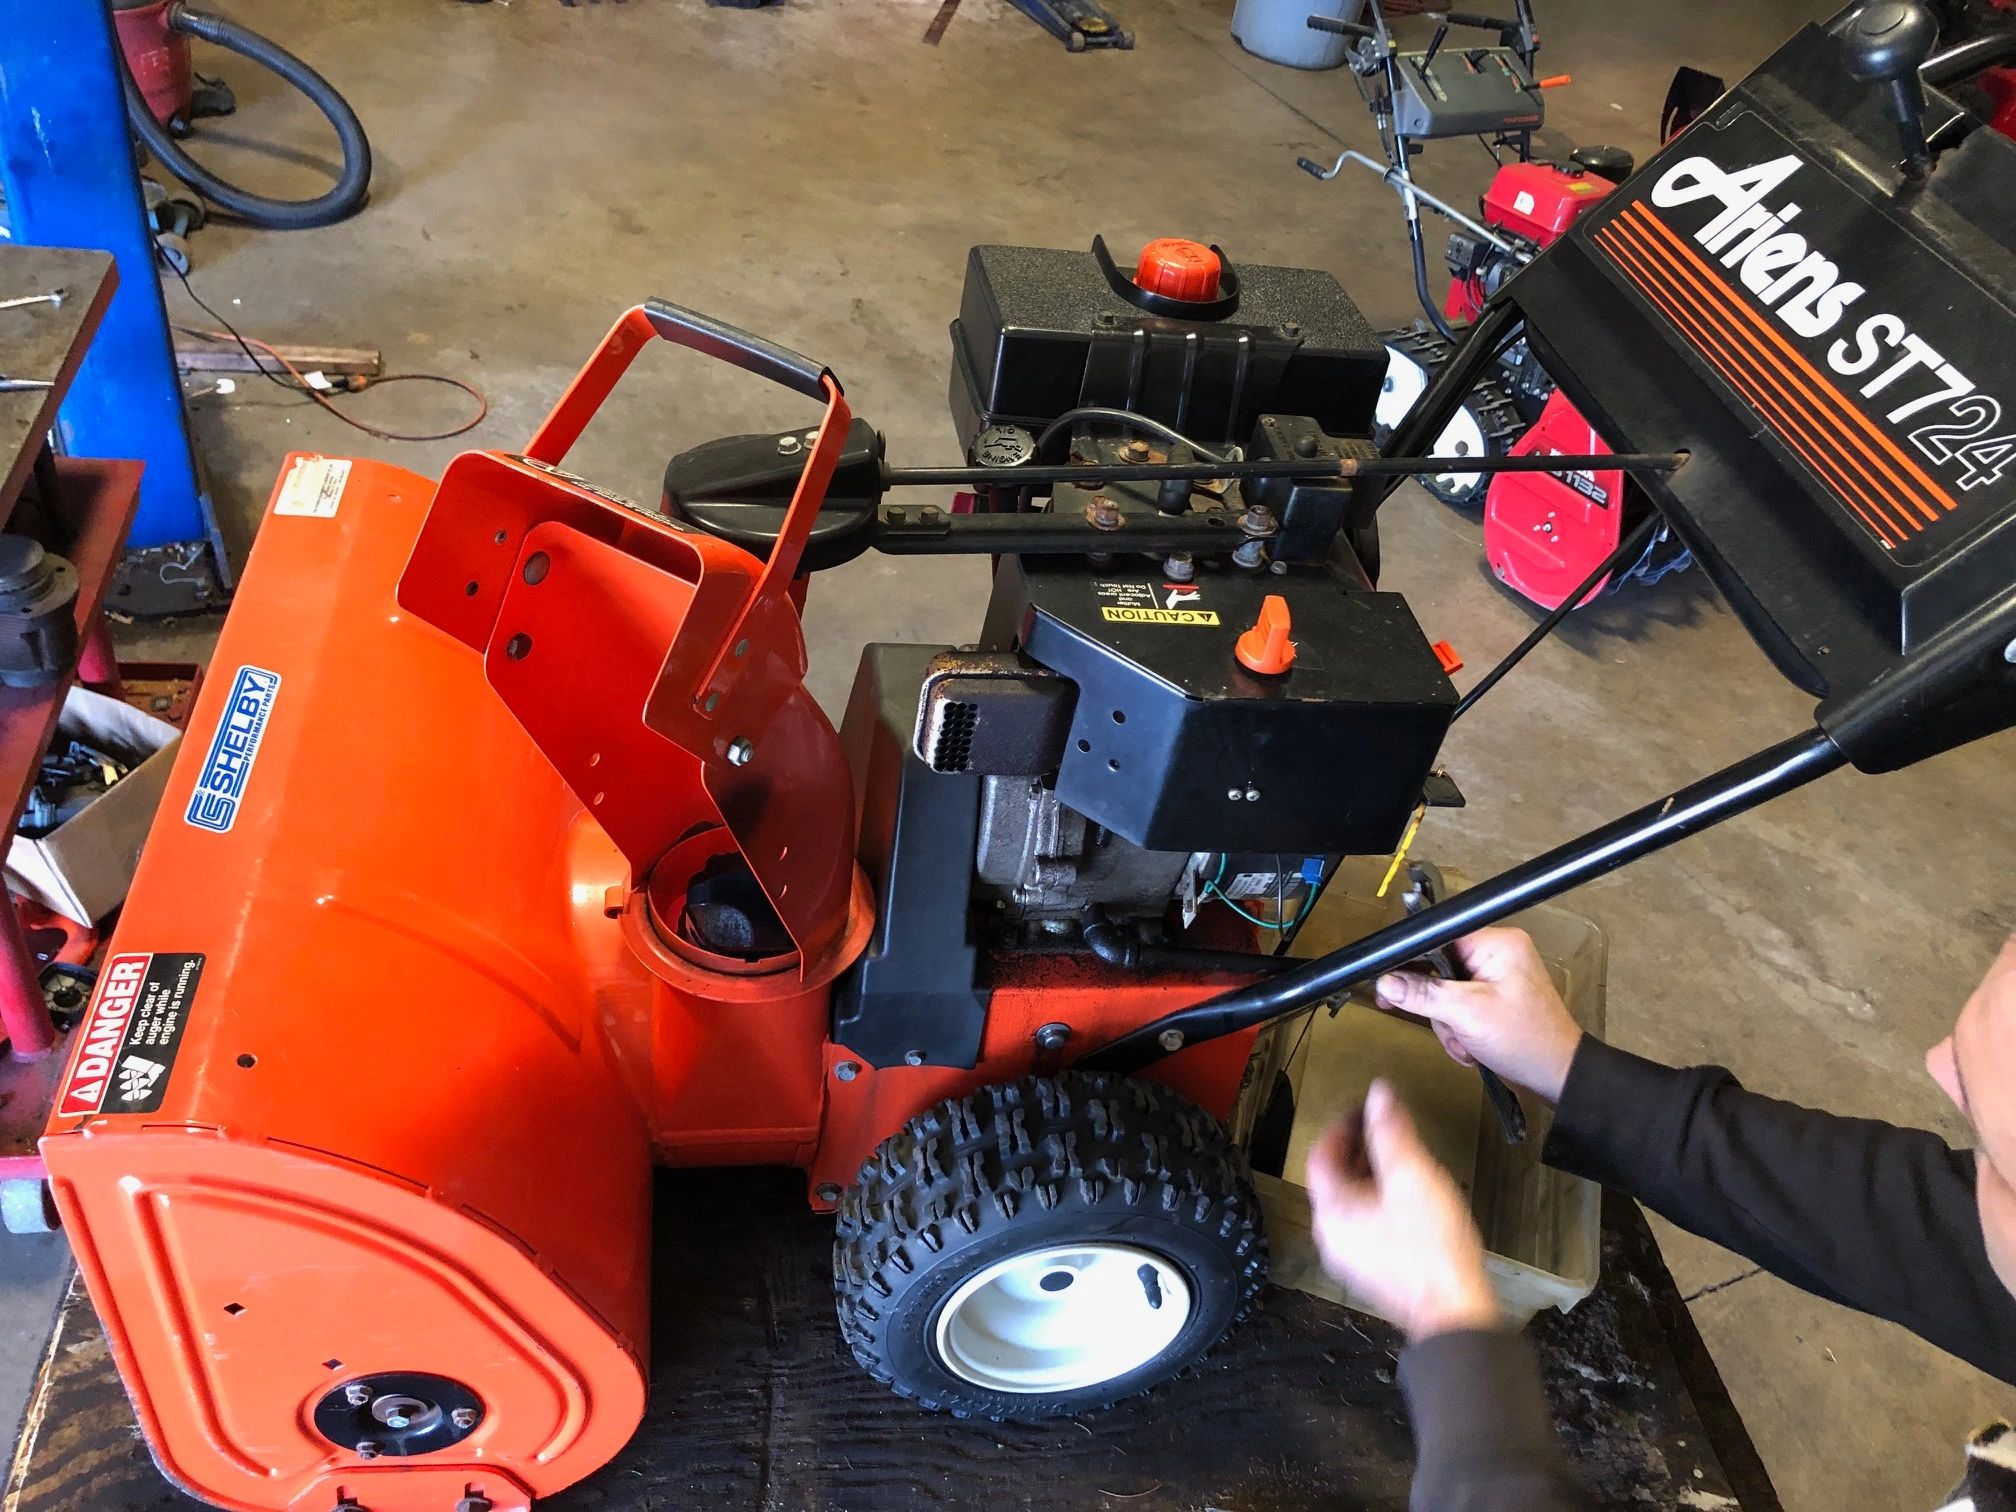 We replace and service Snowblowers like this Ariens ST724.